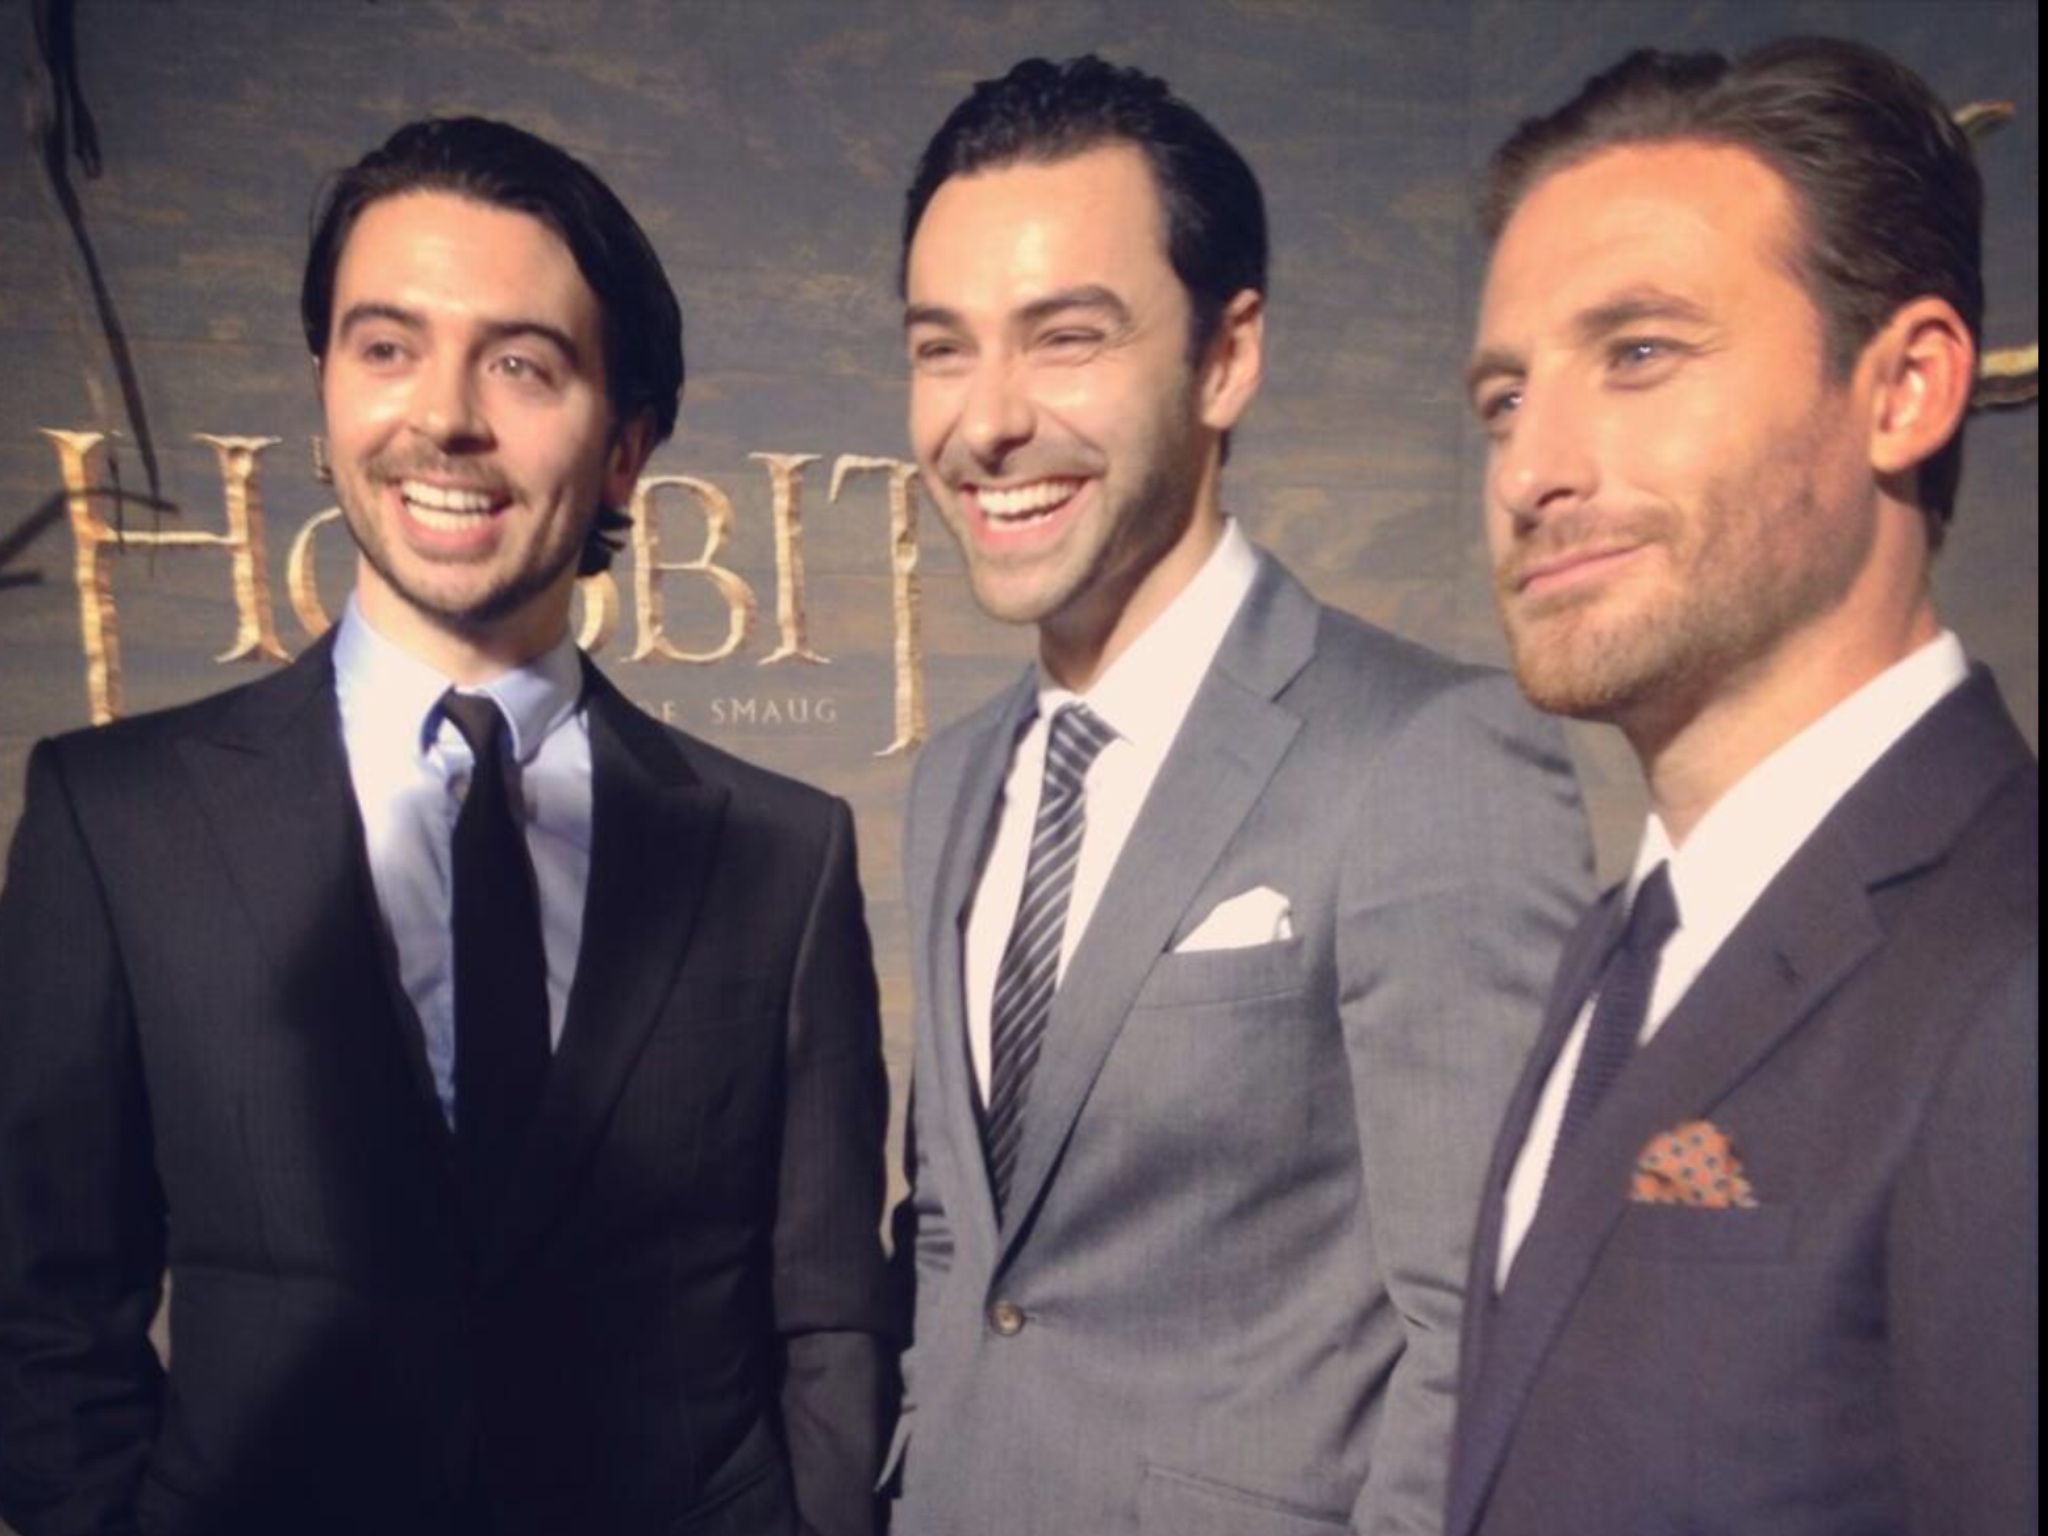 Ryan Gage, Aidan Turner and Dean O'Gorman.'The Hobbit: Desolation of Smaug' premiere at the Dolby Theatre, Dec 2nd 2013.